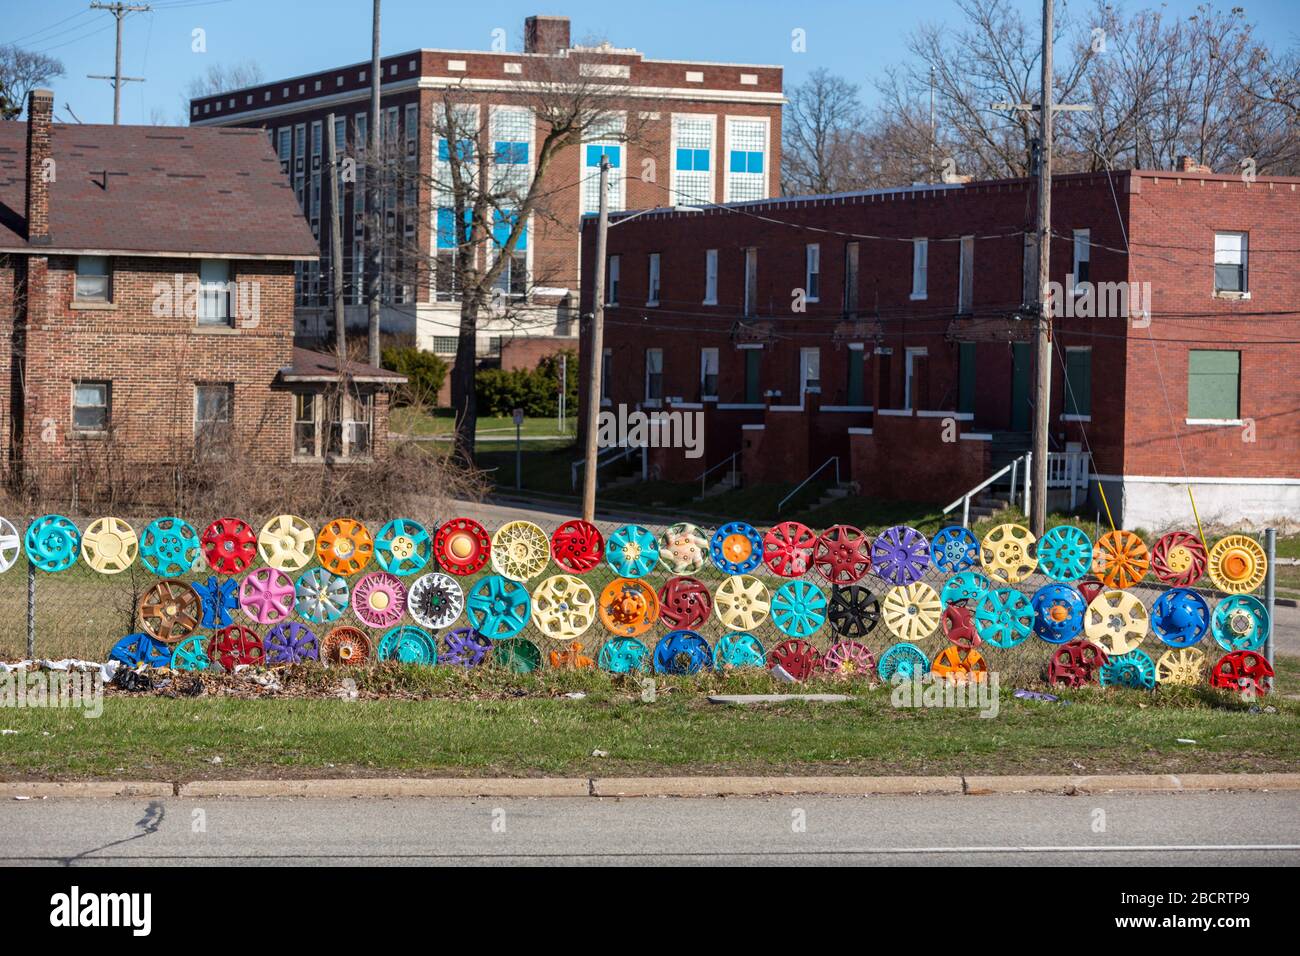 Pontiac, Michigan - Painted hubcabs decorate a fence. Stock Photo